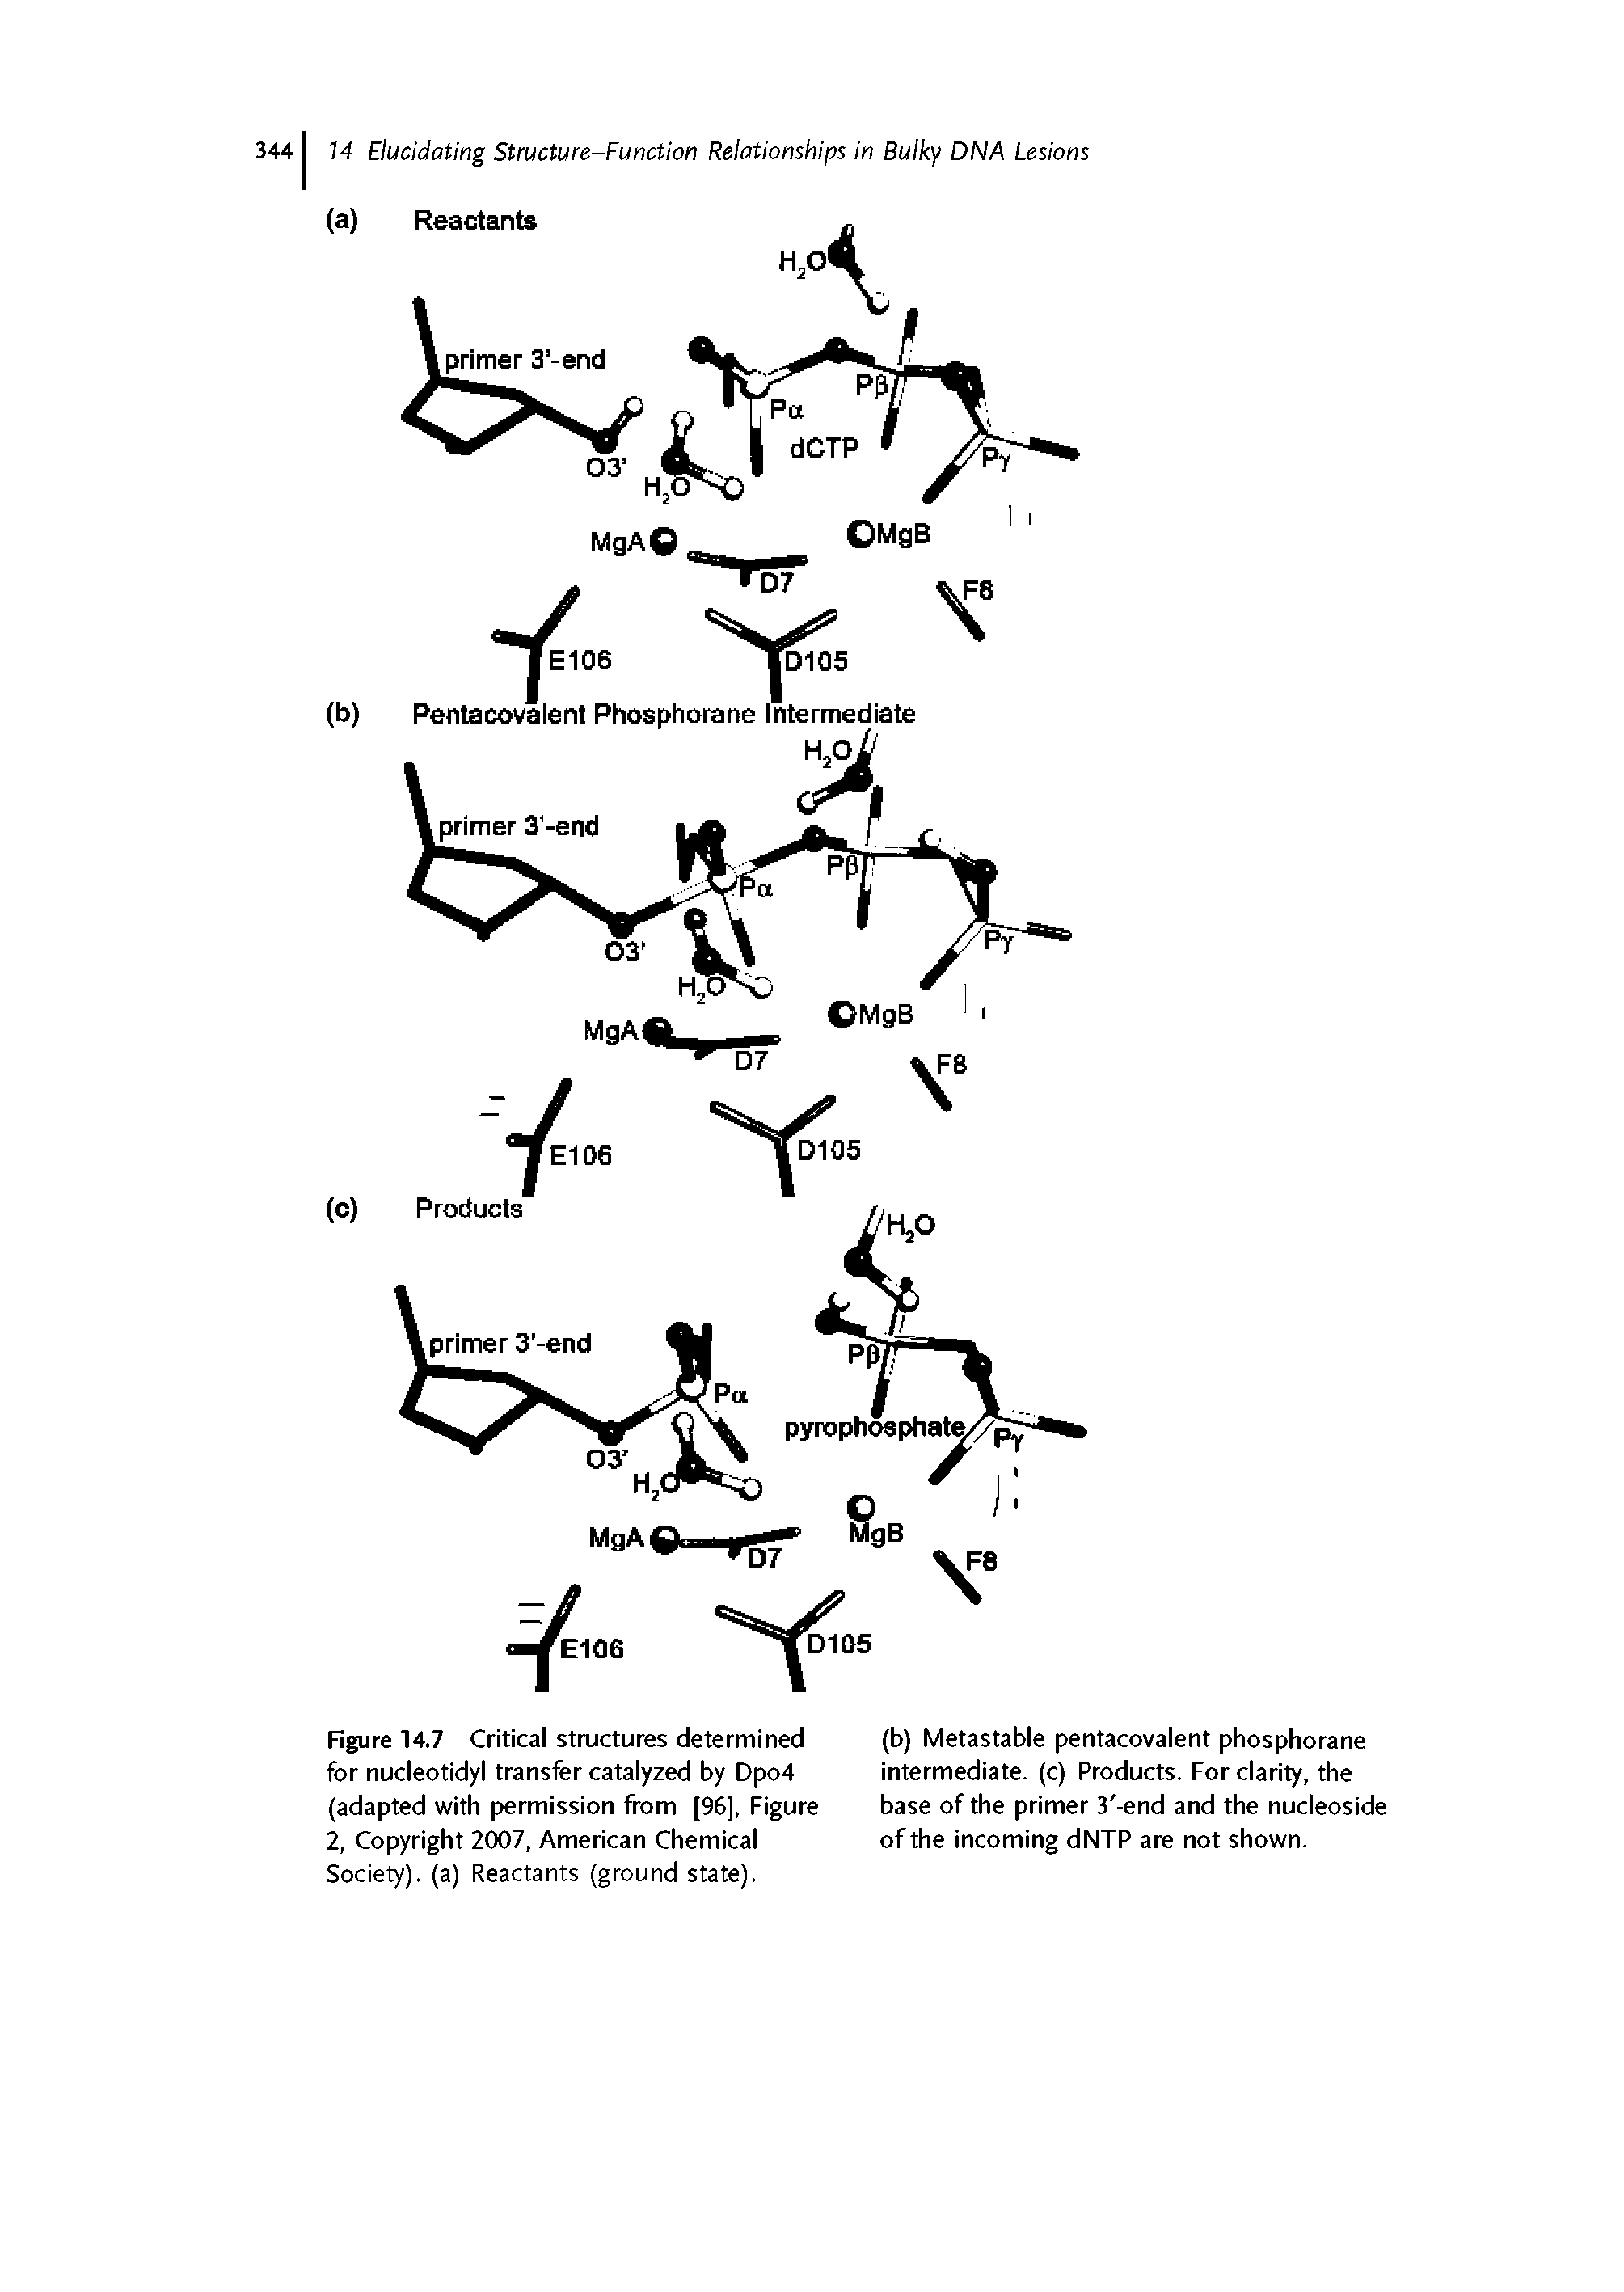 Figure 14.7 Critical structures determined for nucleotidyl transfer catalyzed by Dpo4 (adapted with permission from [96], Figure 2, Copyright 2007, American Chemical...